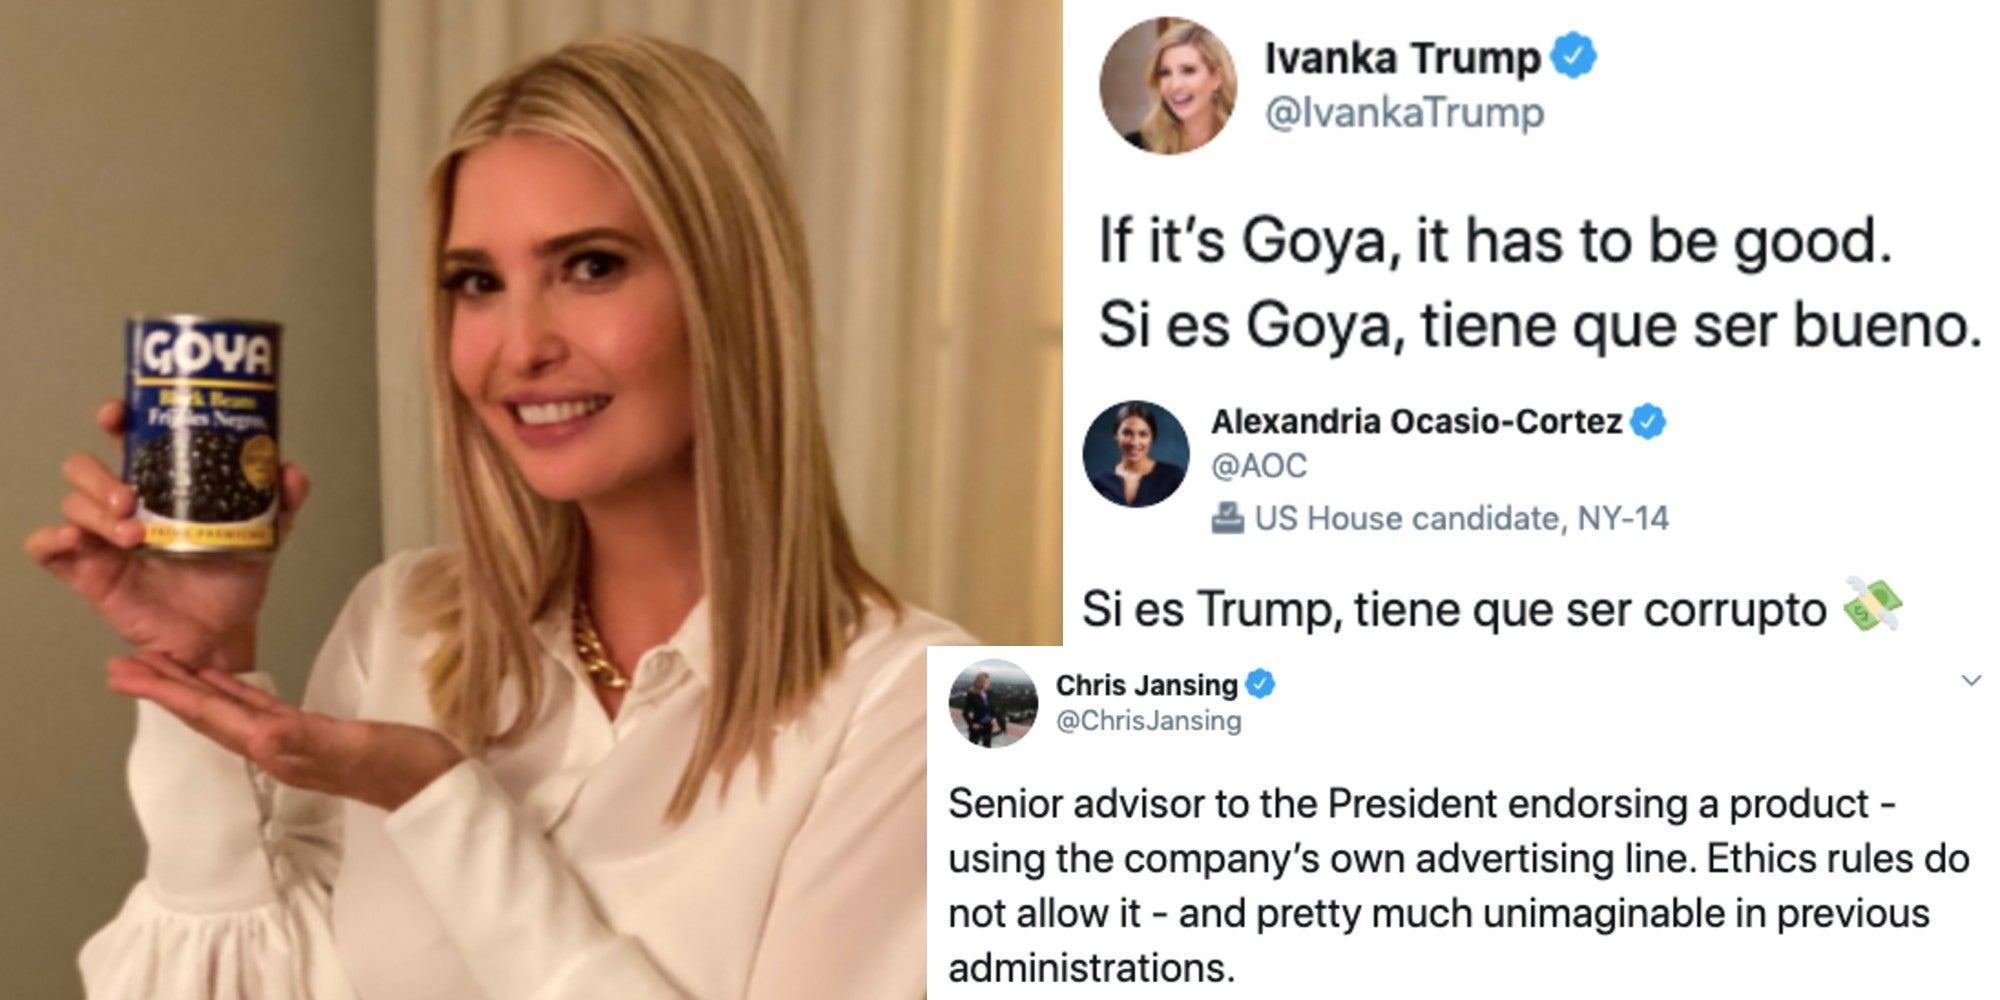 Ivanka Trump Violated Ethics Rules for Having a Picture with Goya: US rights groups